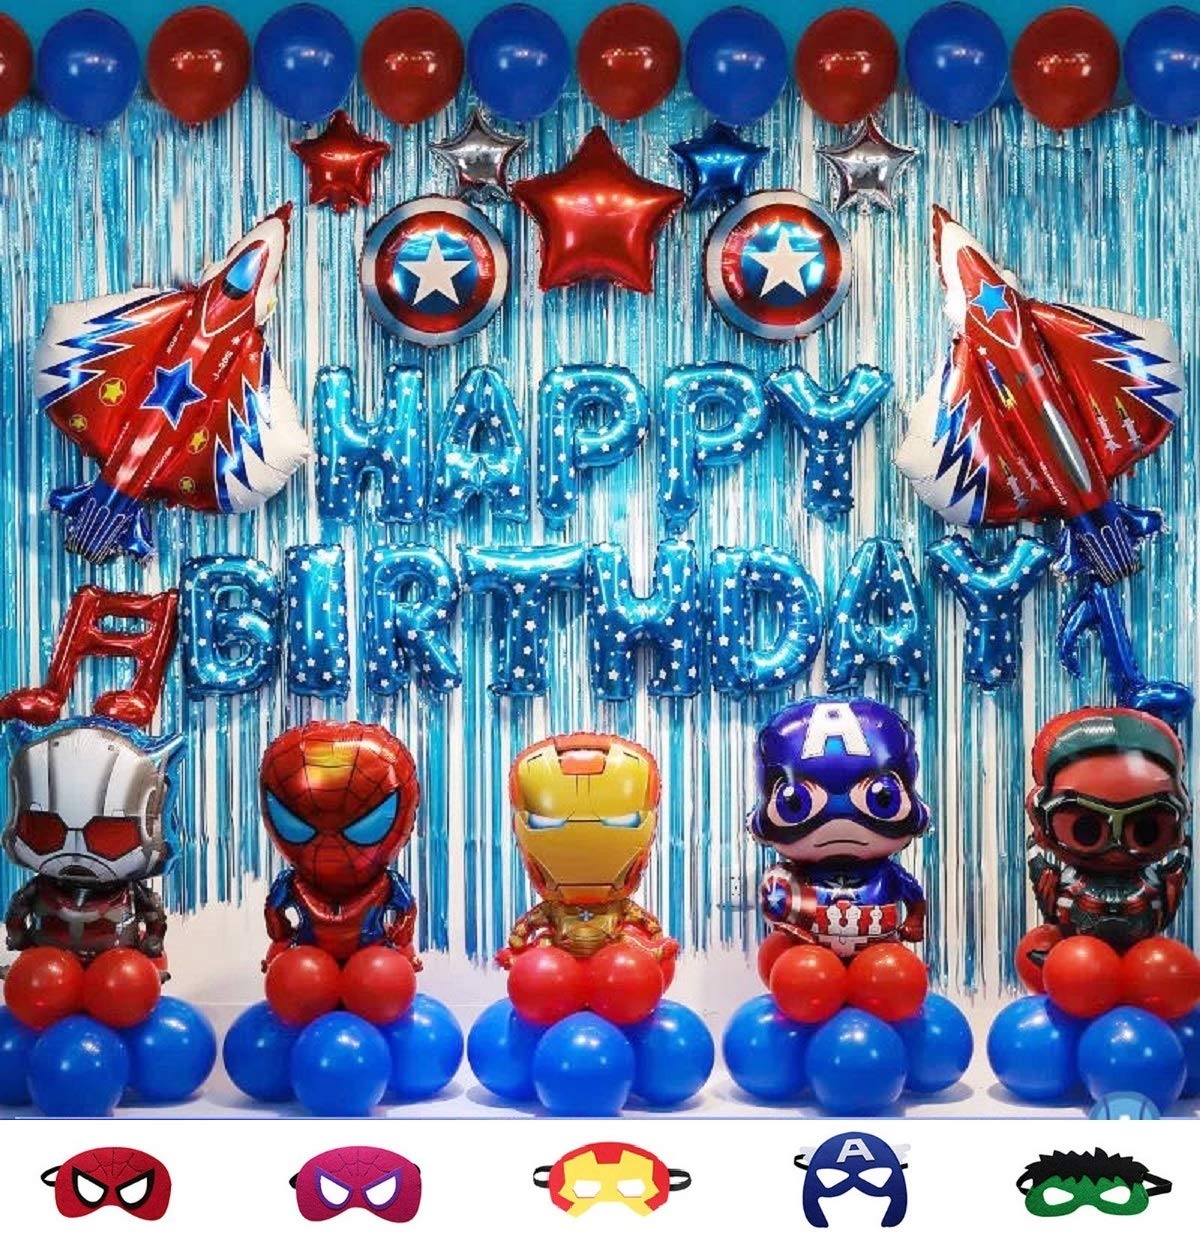 Avengers simple balloon decorations at home for birthday boy